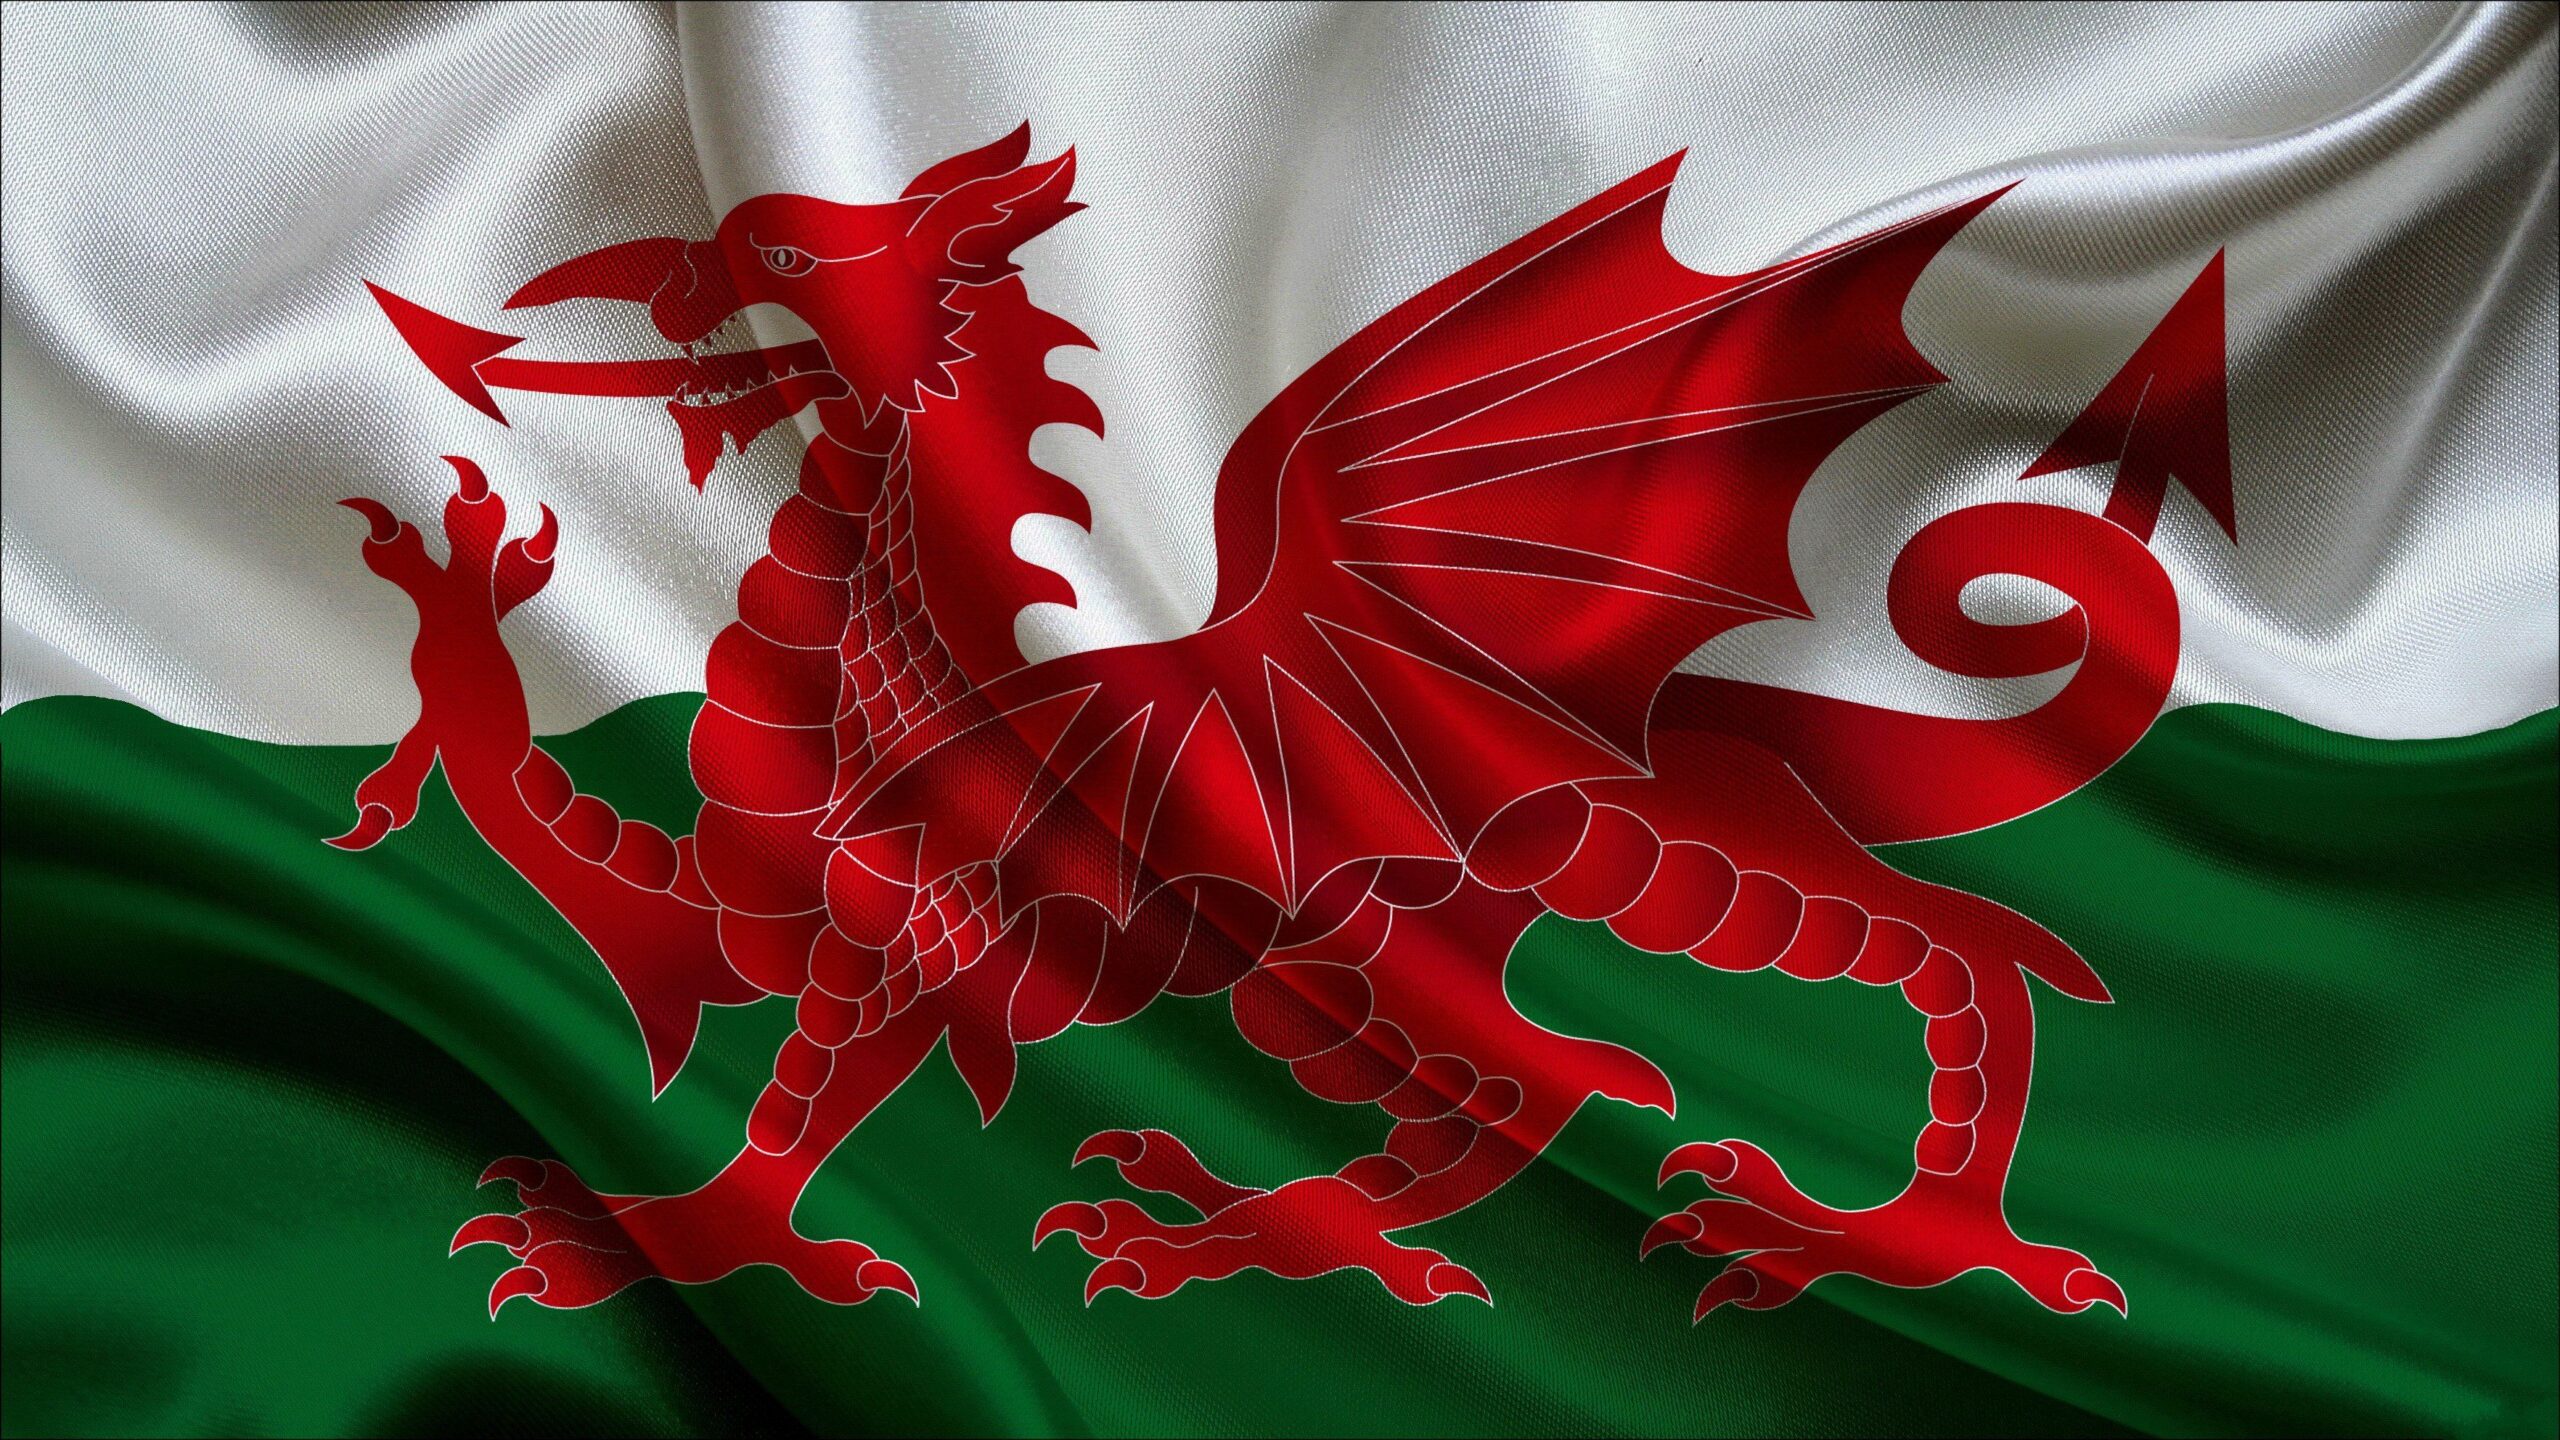 Wales, Flag, Dragon Wallpapers 2K | Desk 4K and Mobile Backgrounds